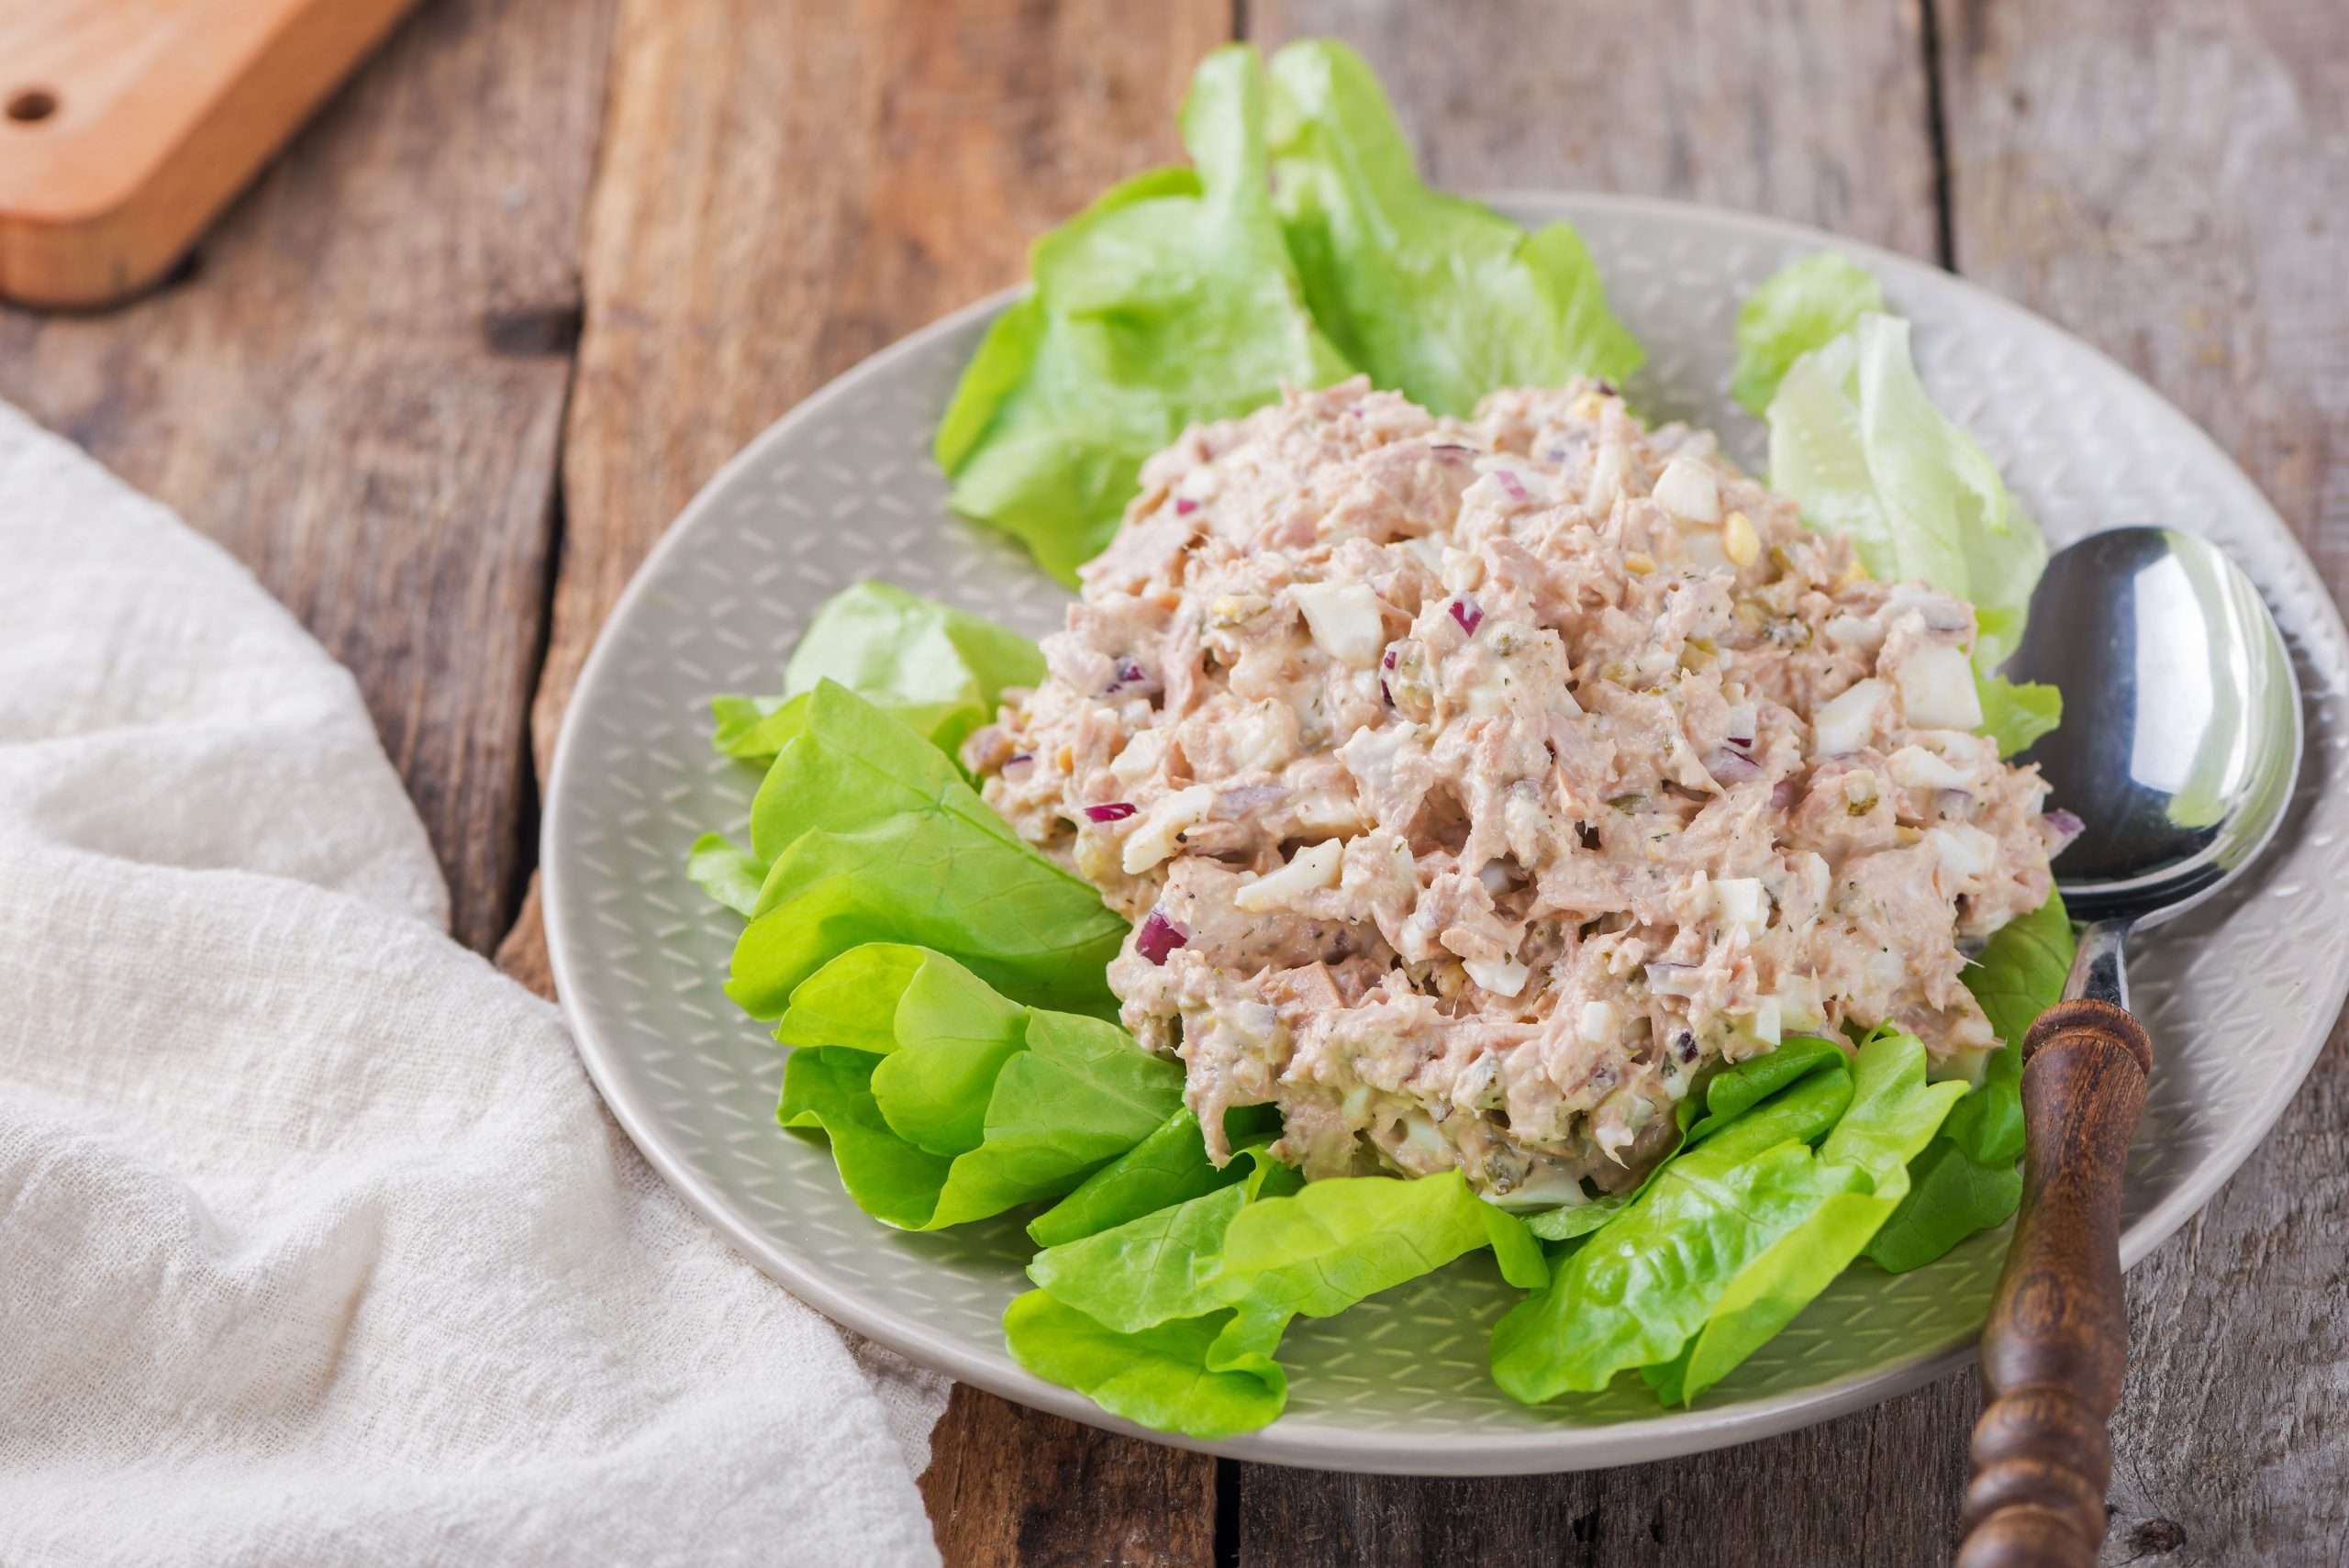 Tuna Salad Recipe With Eggs, Dill, and Red Onion